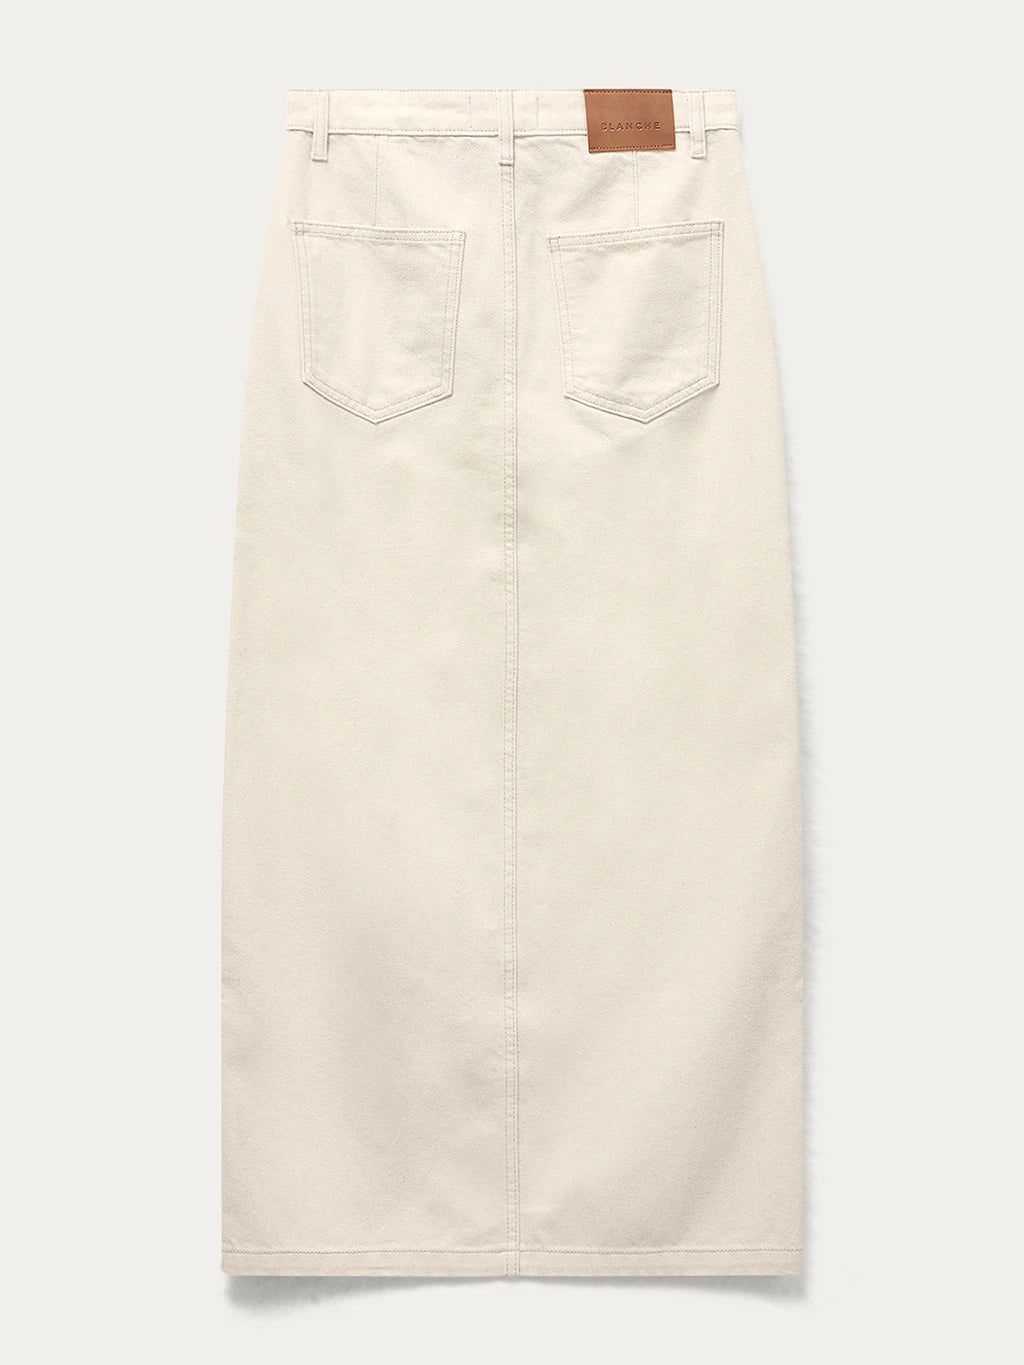 Blanche Toto Skirt